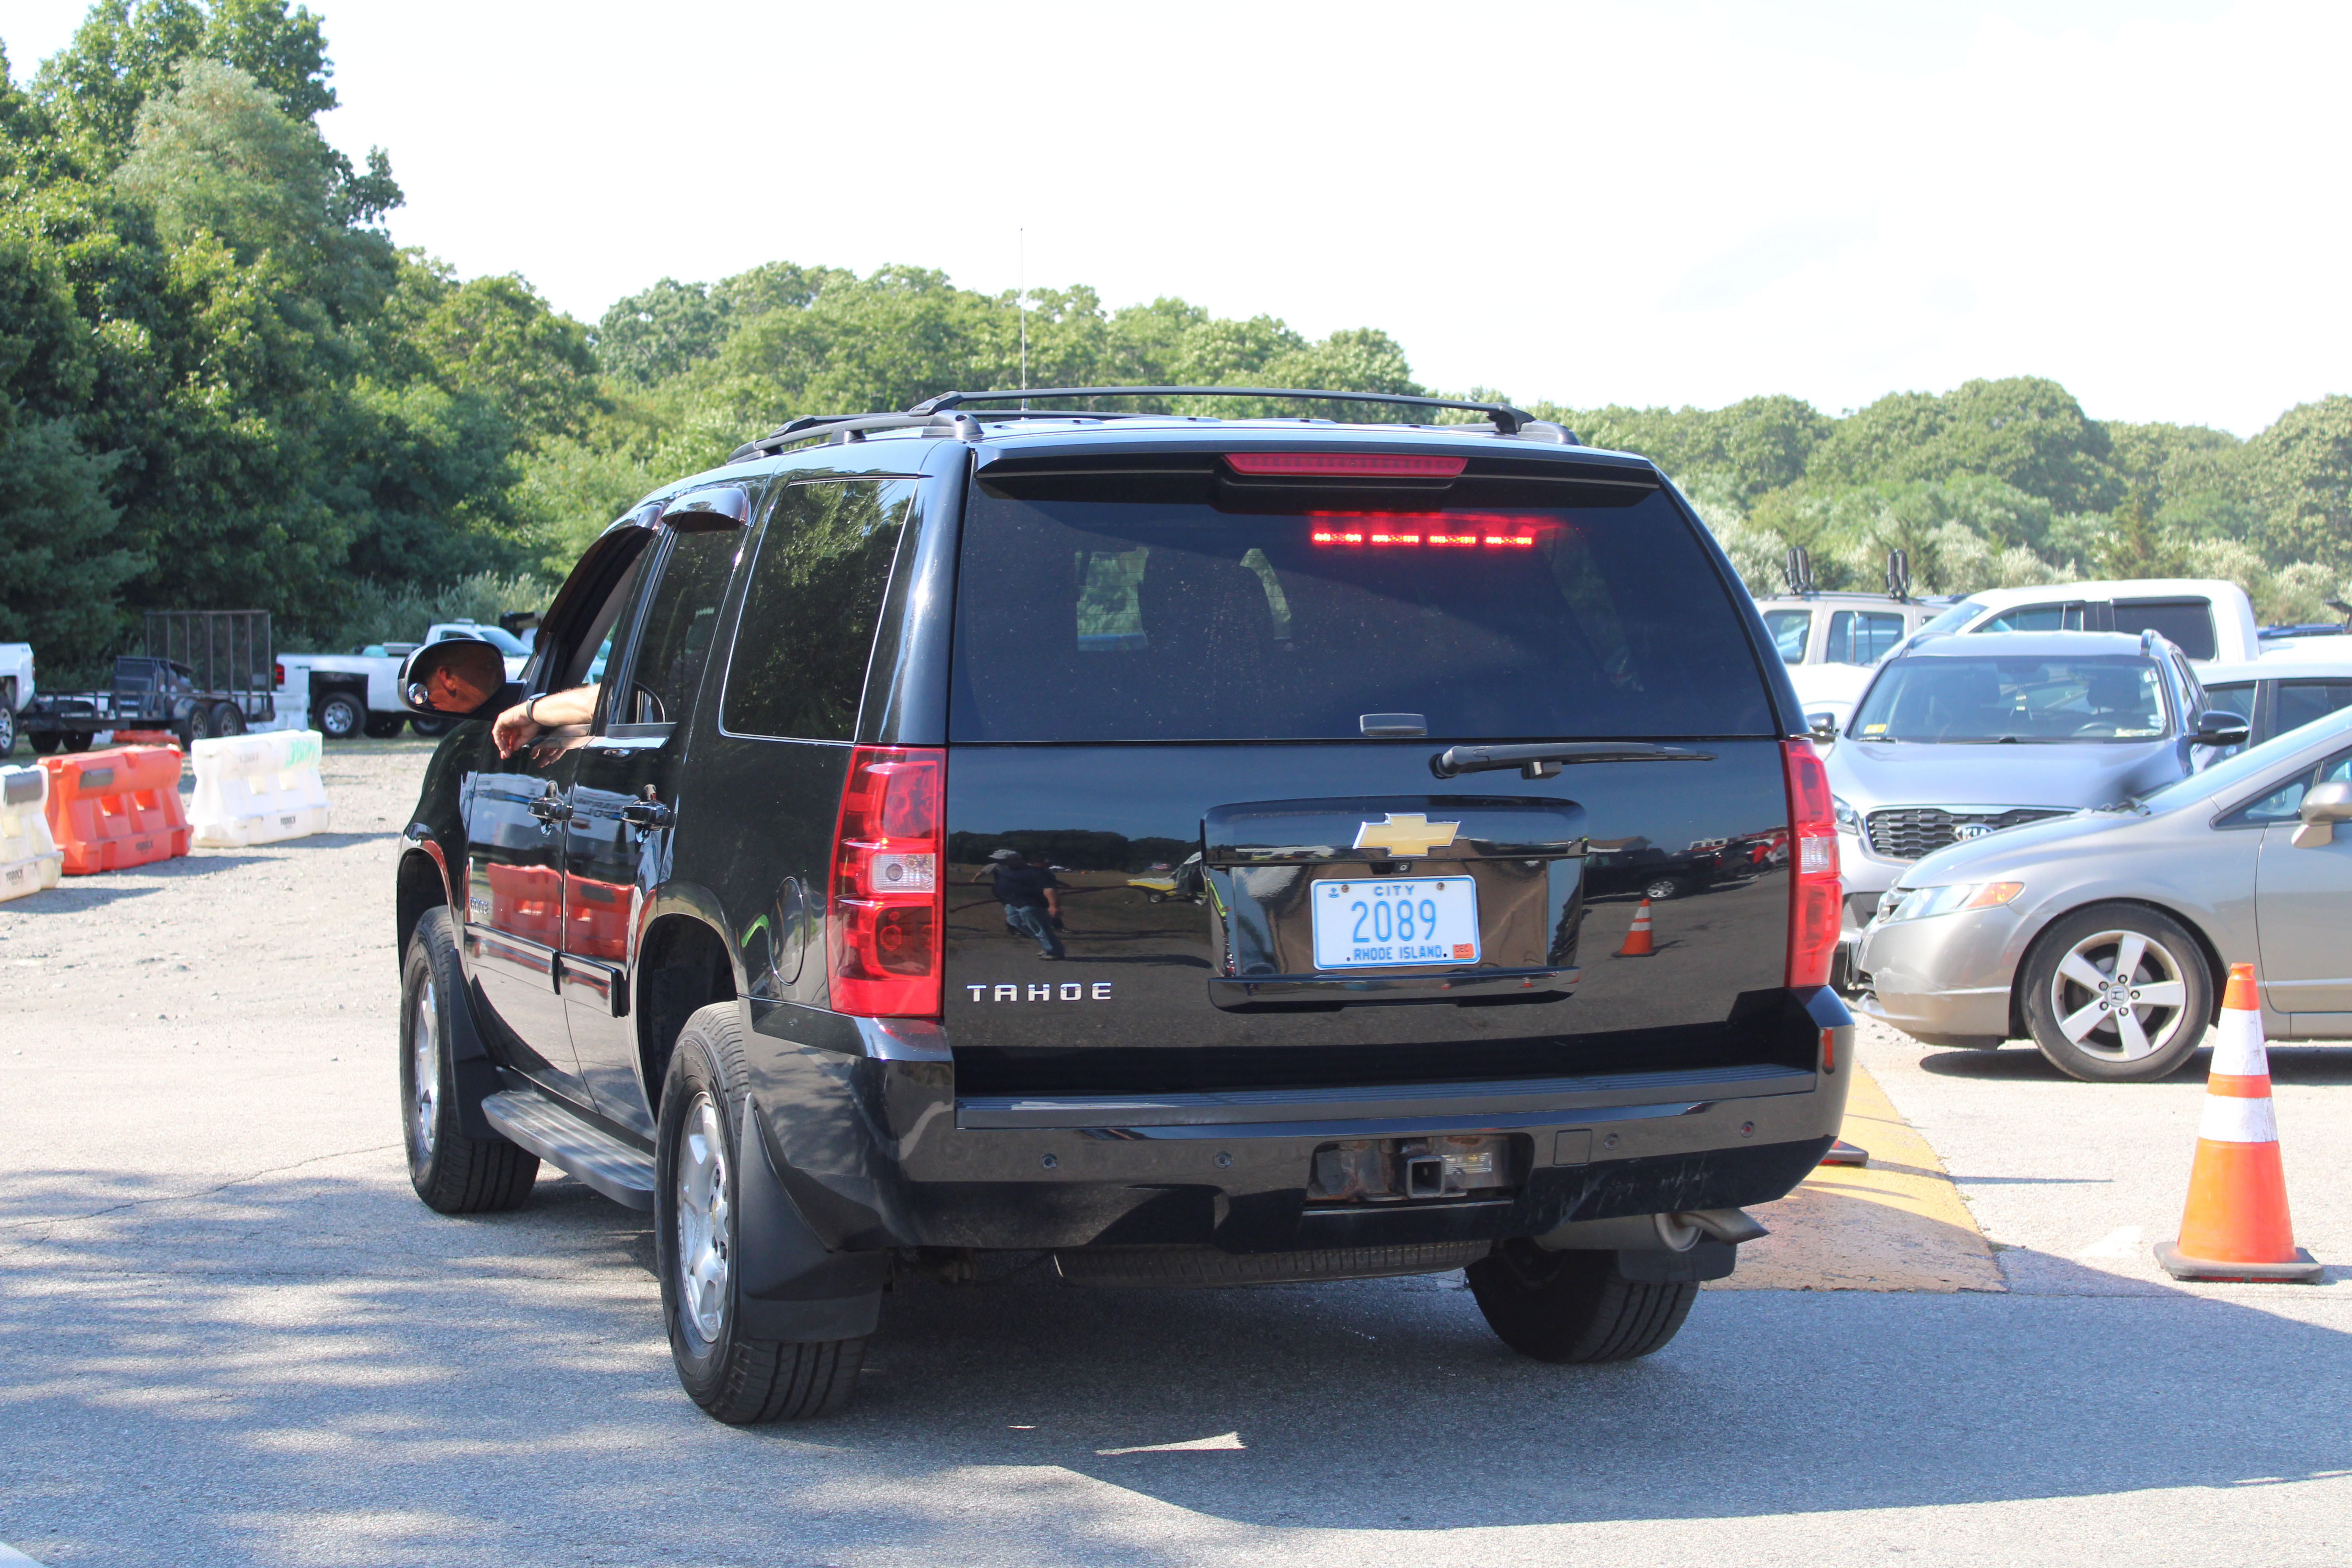 A photo  of Warwick Public Works
            Car 2089, a 2007-2014 Chevrolet Tahoe             taken by @riemergencyvehicles